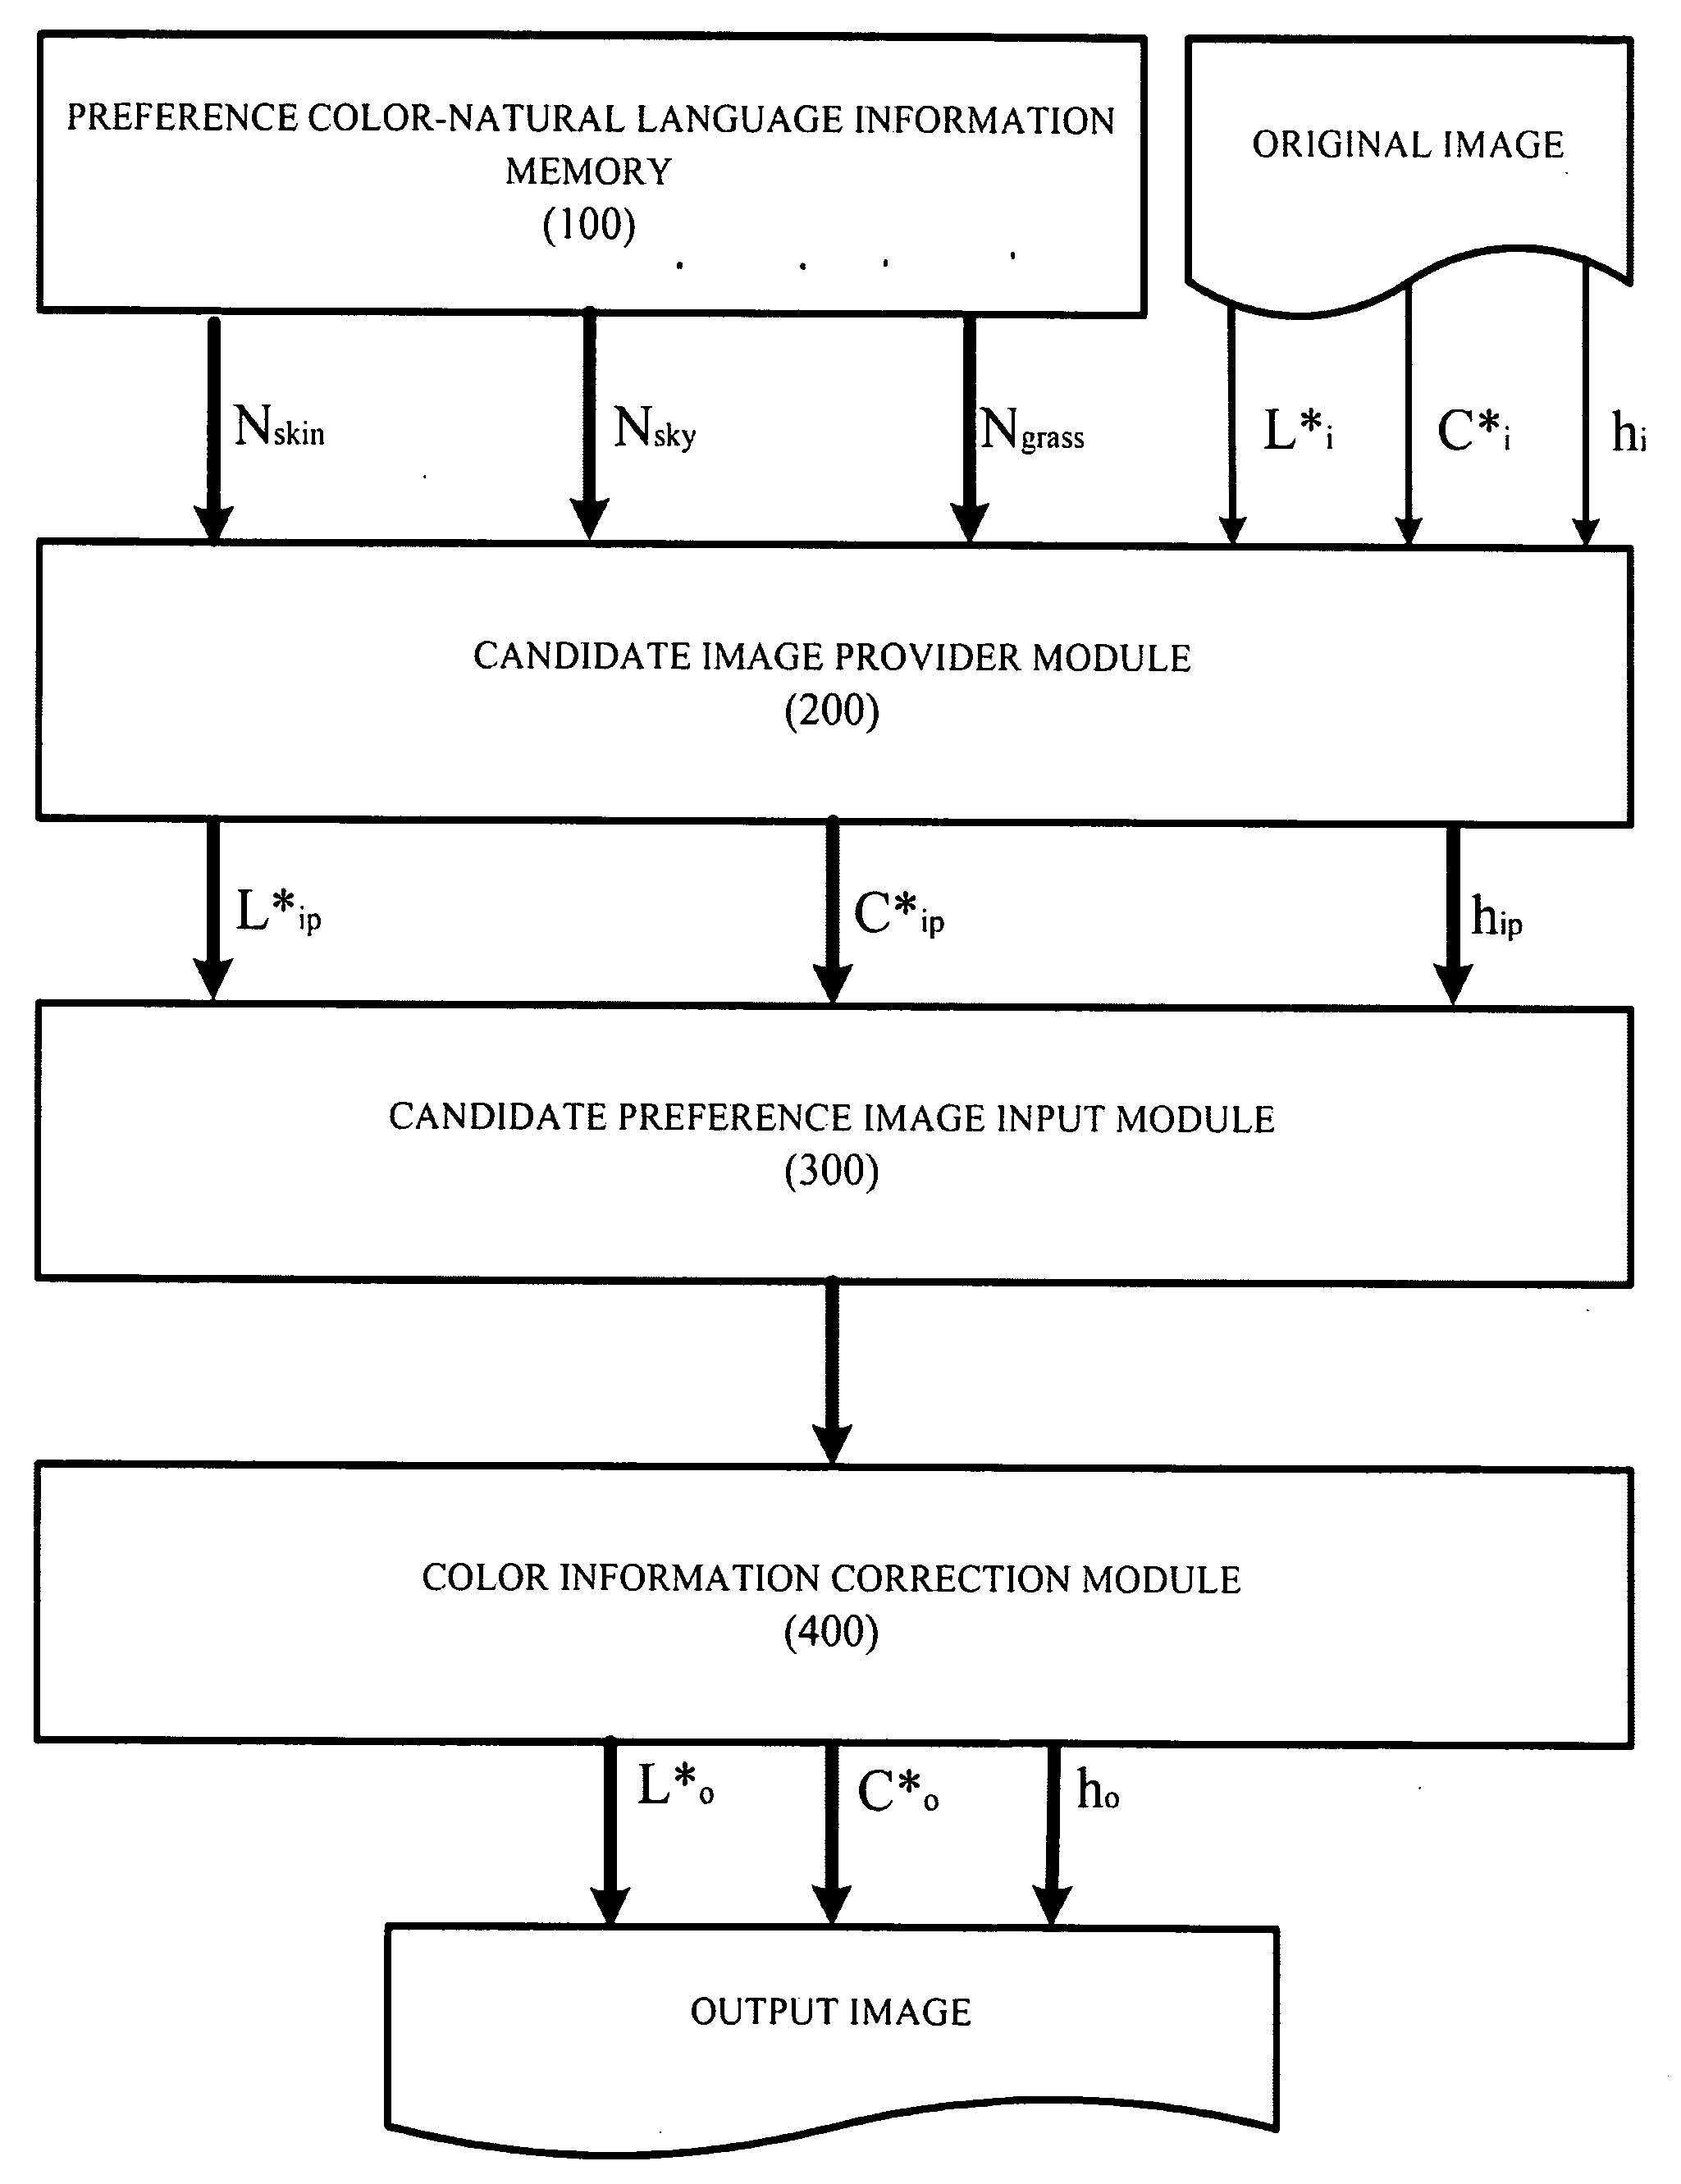 Apparatus and method for reproducing optimized preference color using candidate images and natural languages